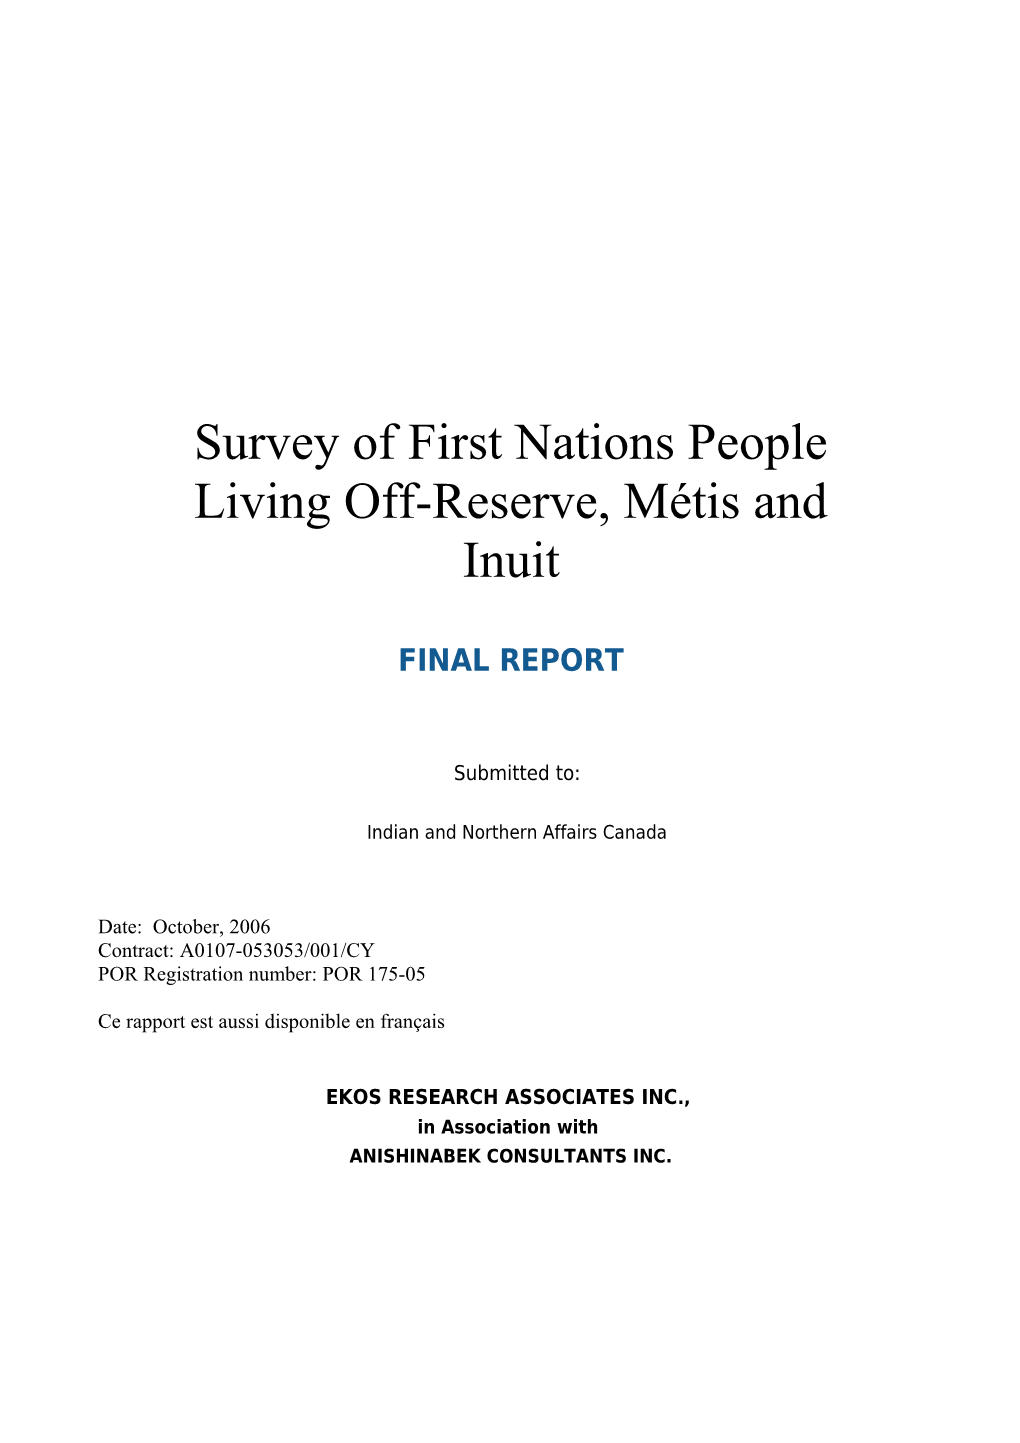 Survey of First Nations People Living Off-Reserve, Métis and Inuit